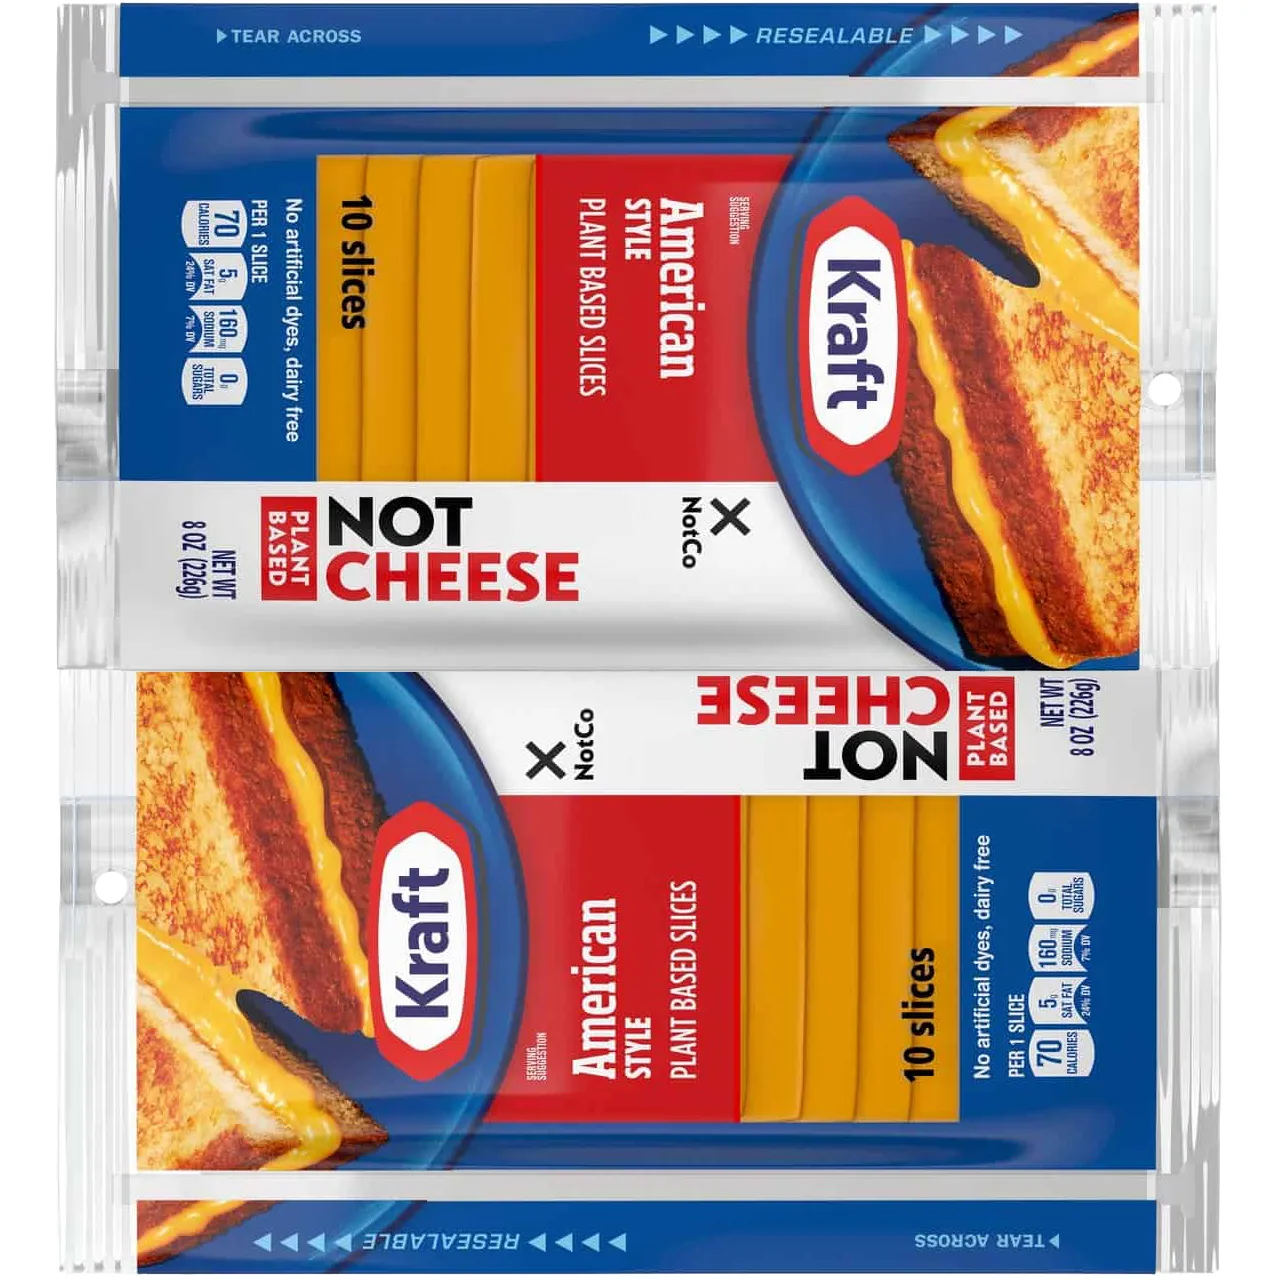 Free Kraft Plant Based Cheese Slices After Cashback